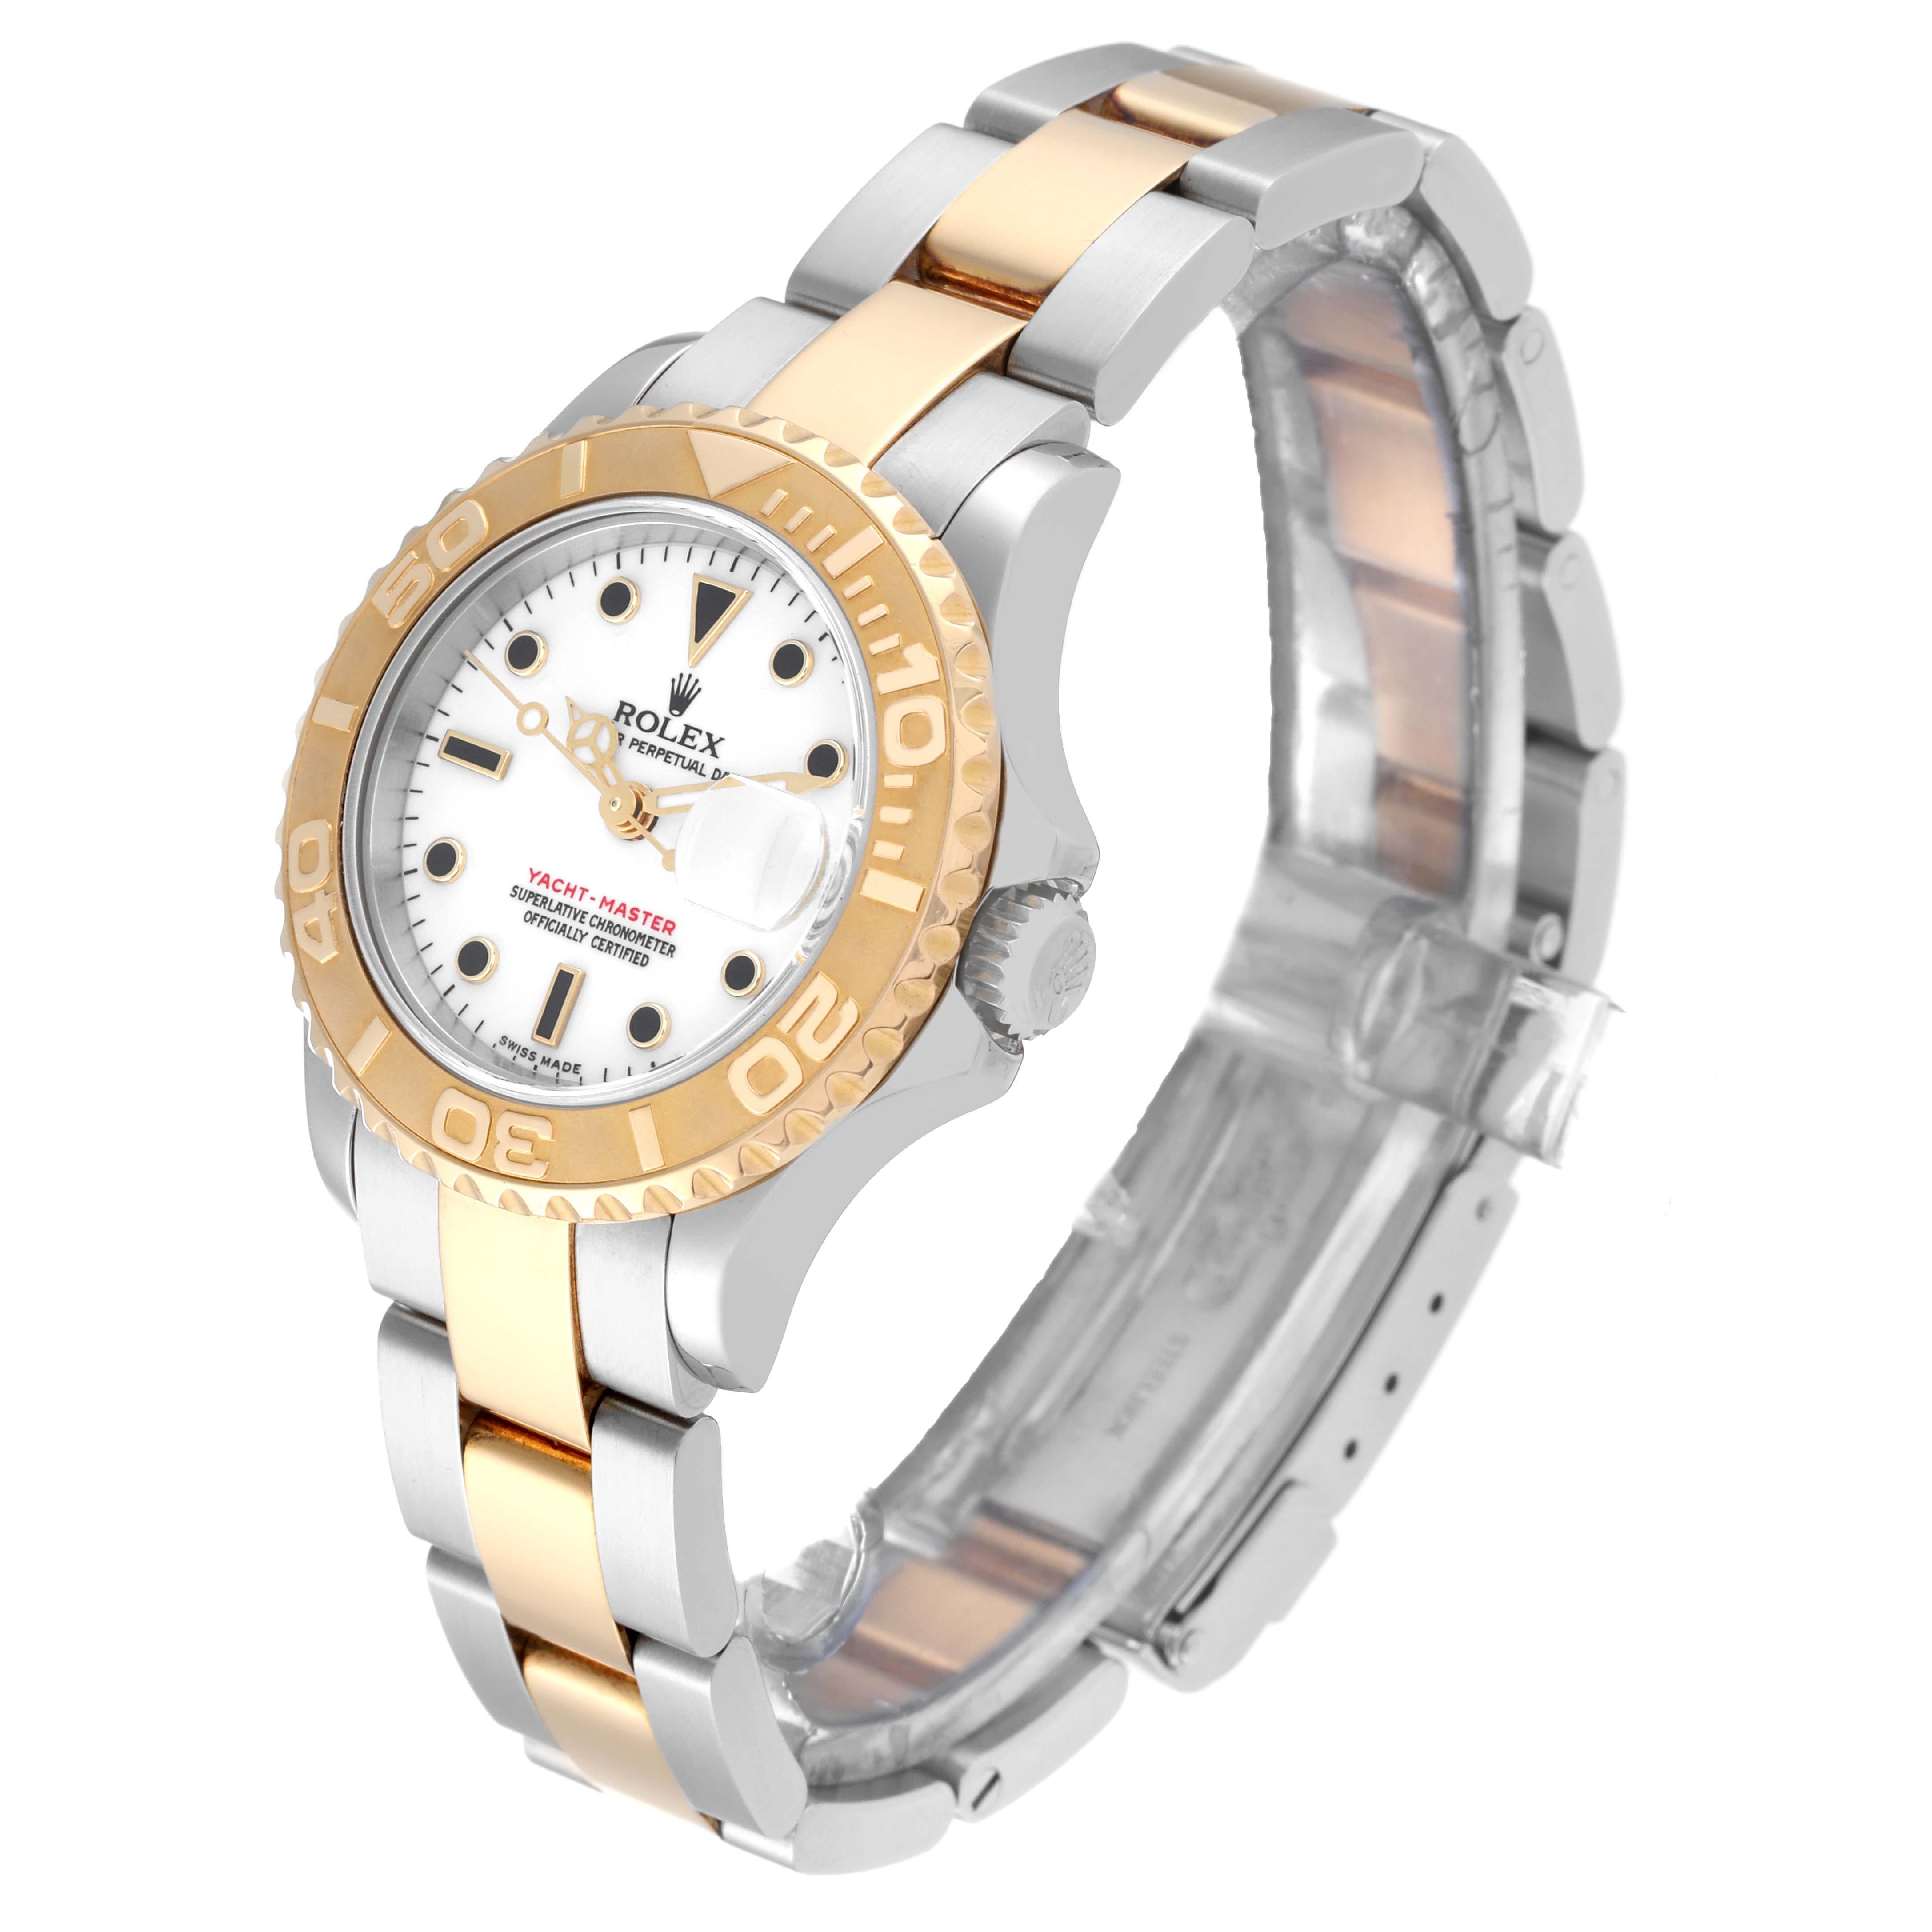 Rolex Yachtmaster 29 White Dial Steel Yellow Gold Ladies Watch 169623 Box Papers 2